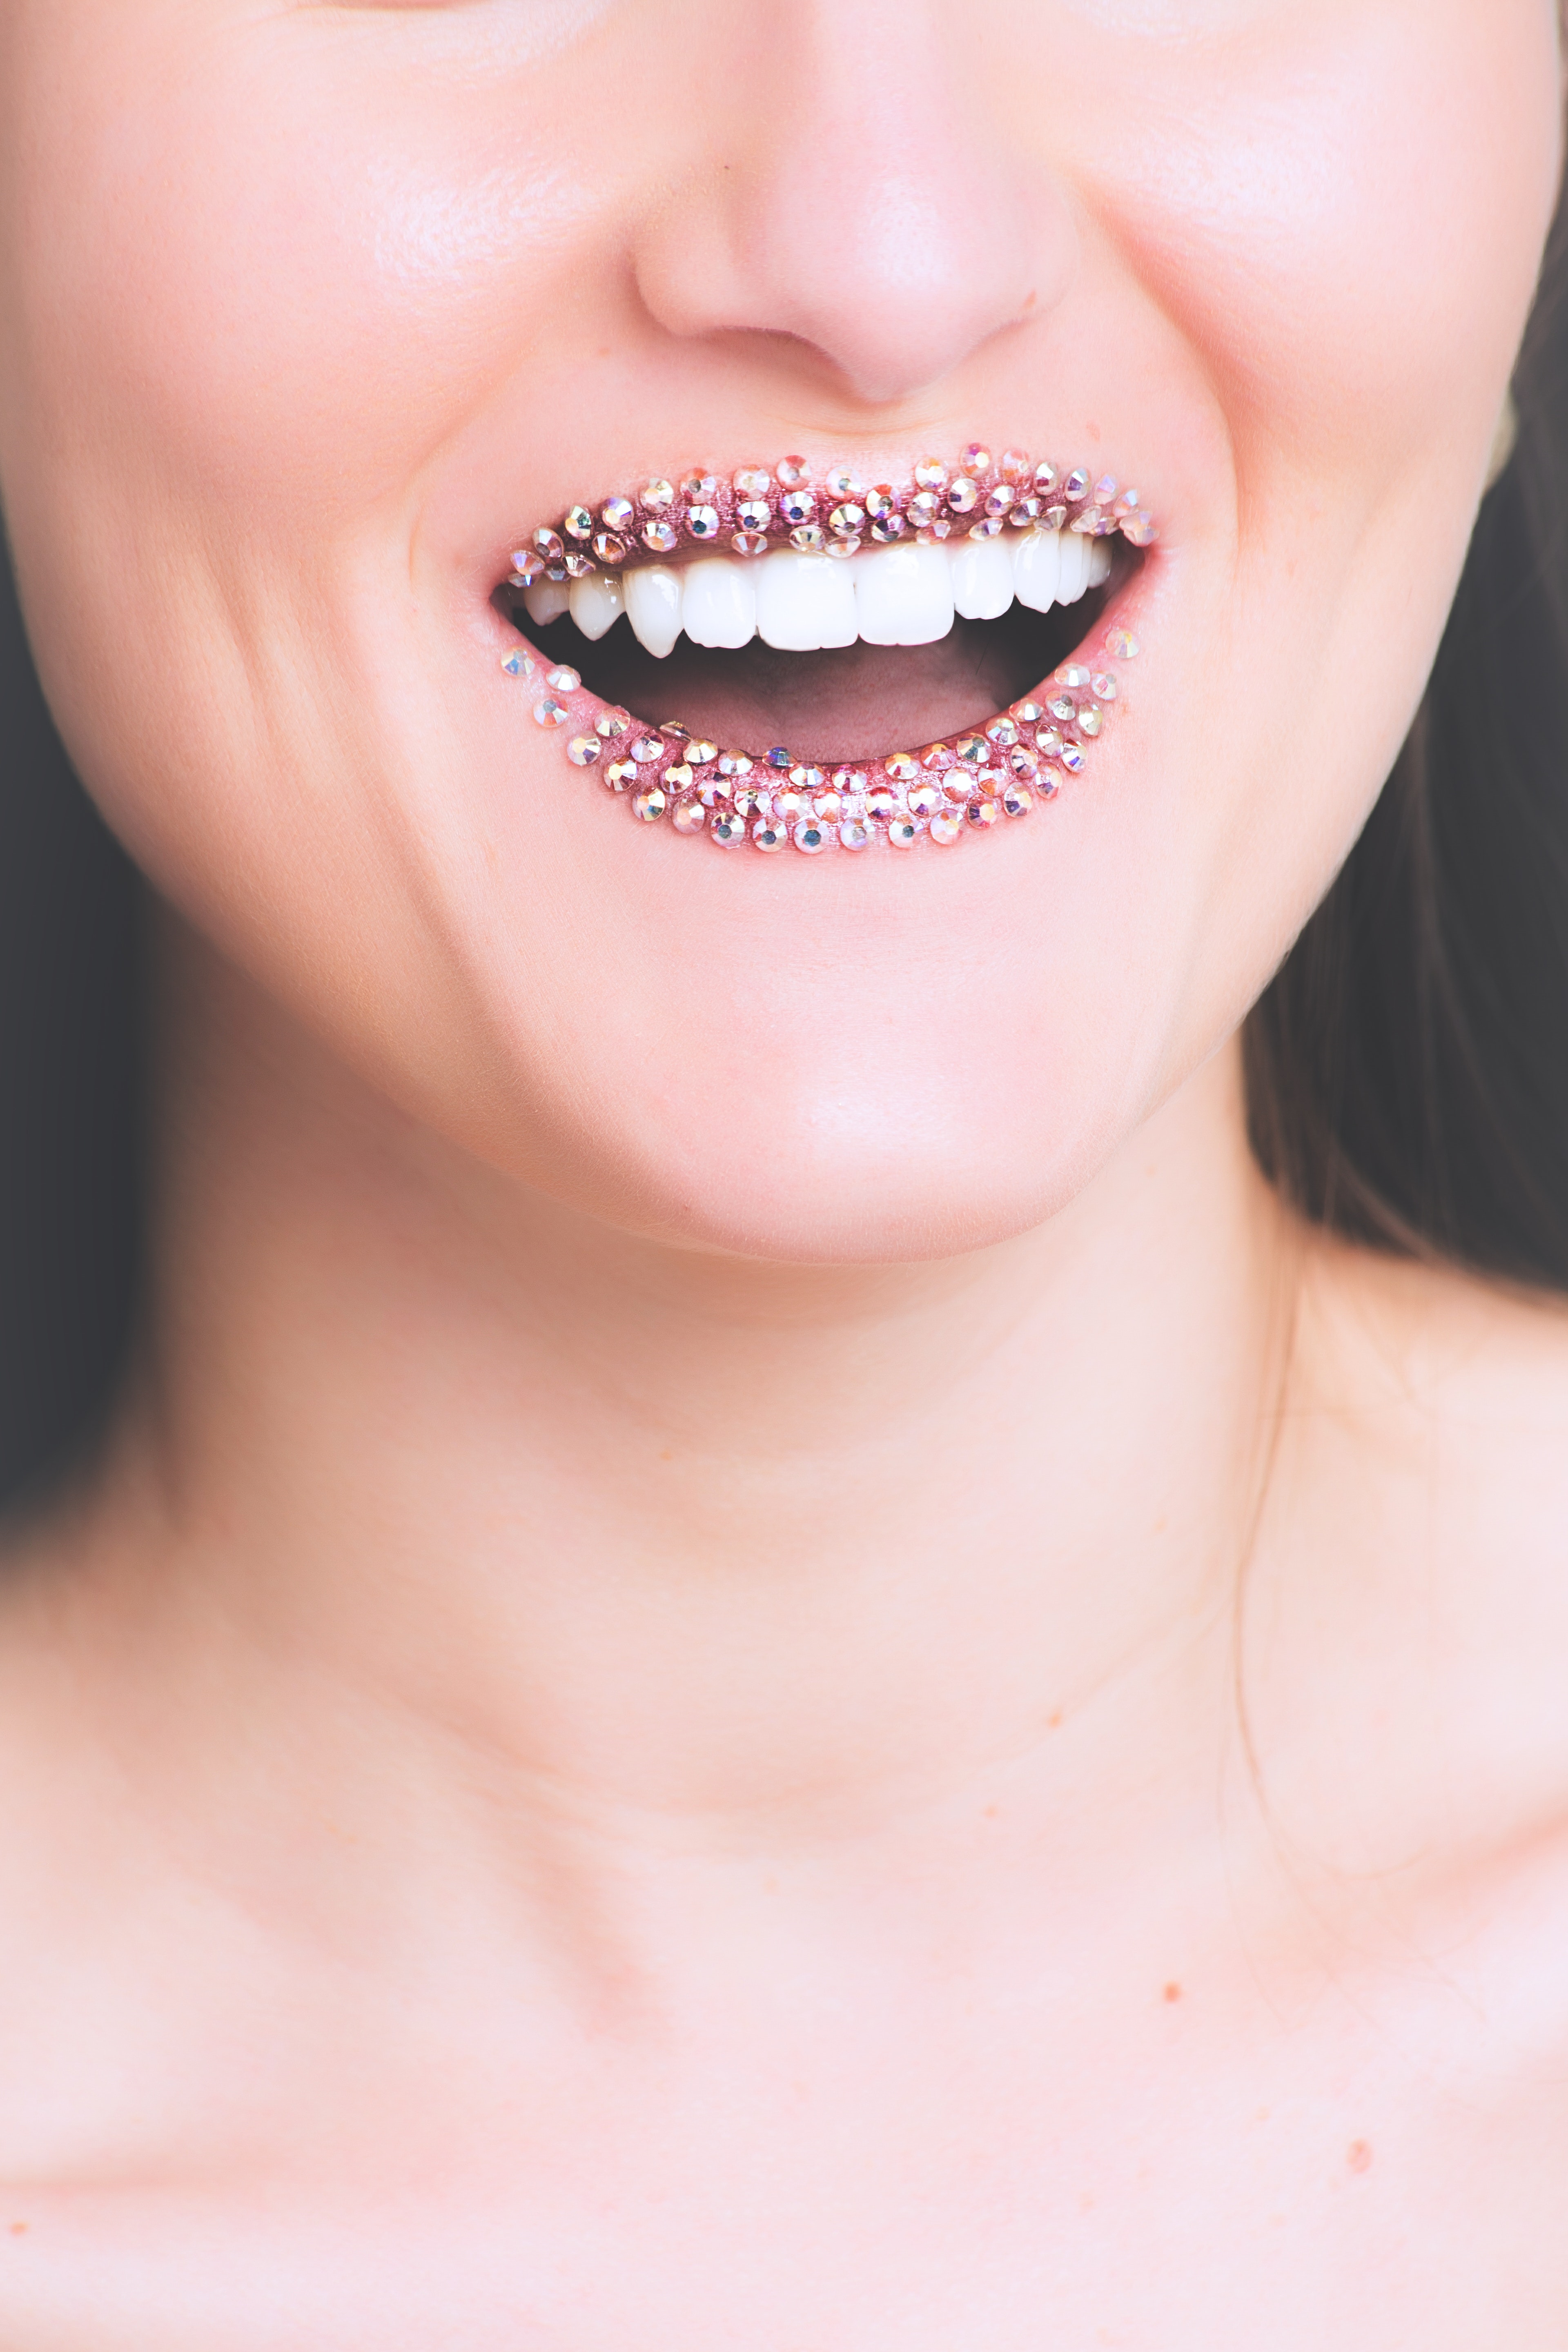 Woman with studded lips photo